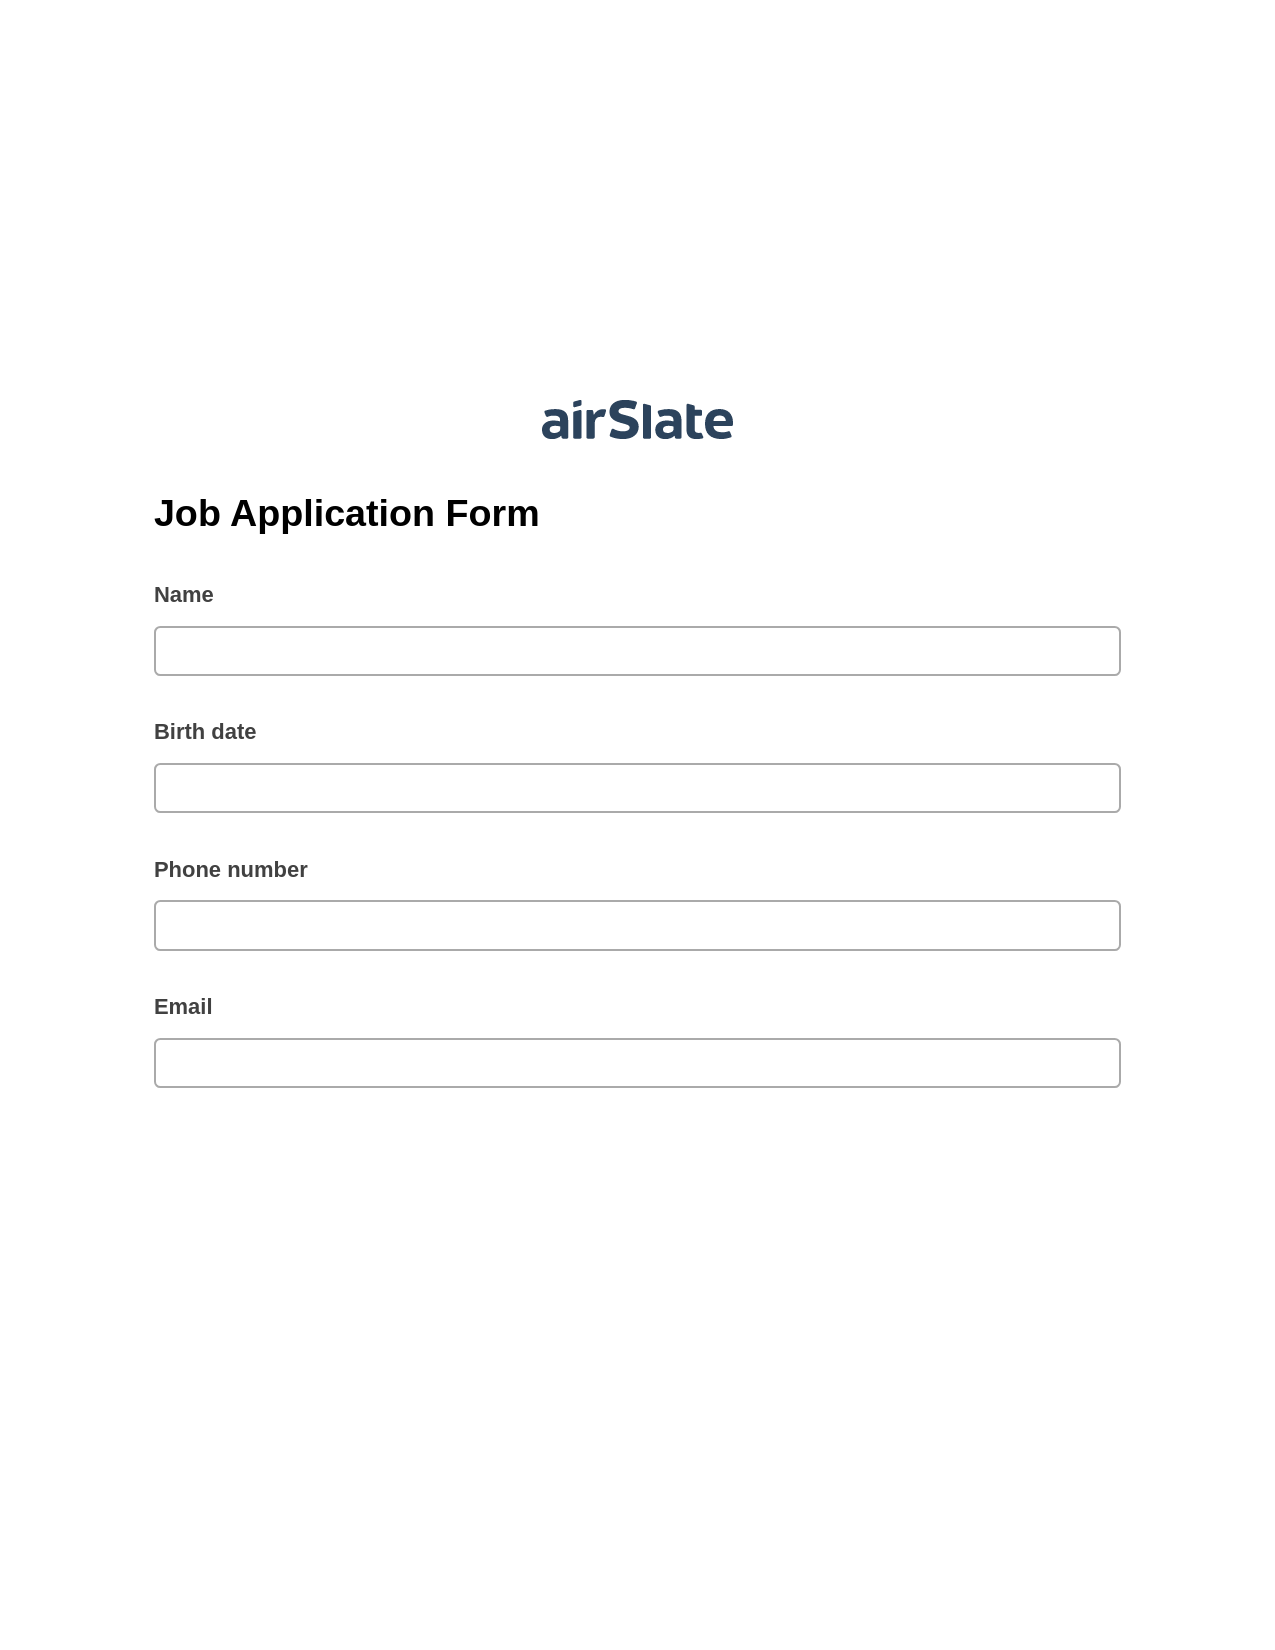 Multirole Job Application Form Pre-fill Dropdown from Airtable, Create Slate from another Flow Bot, Slack Notification Postfinish Bot